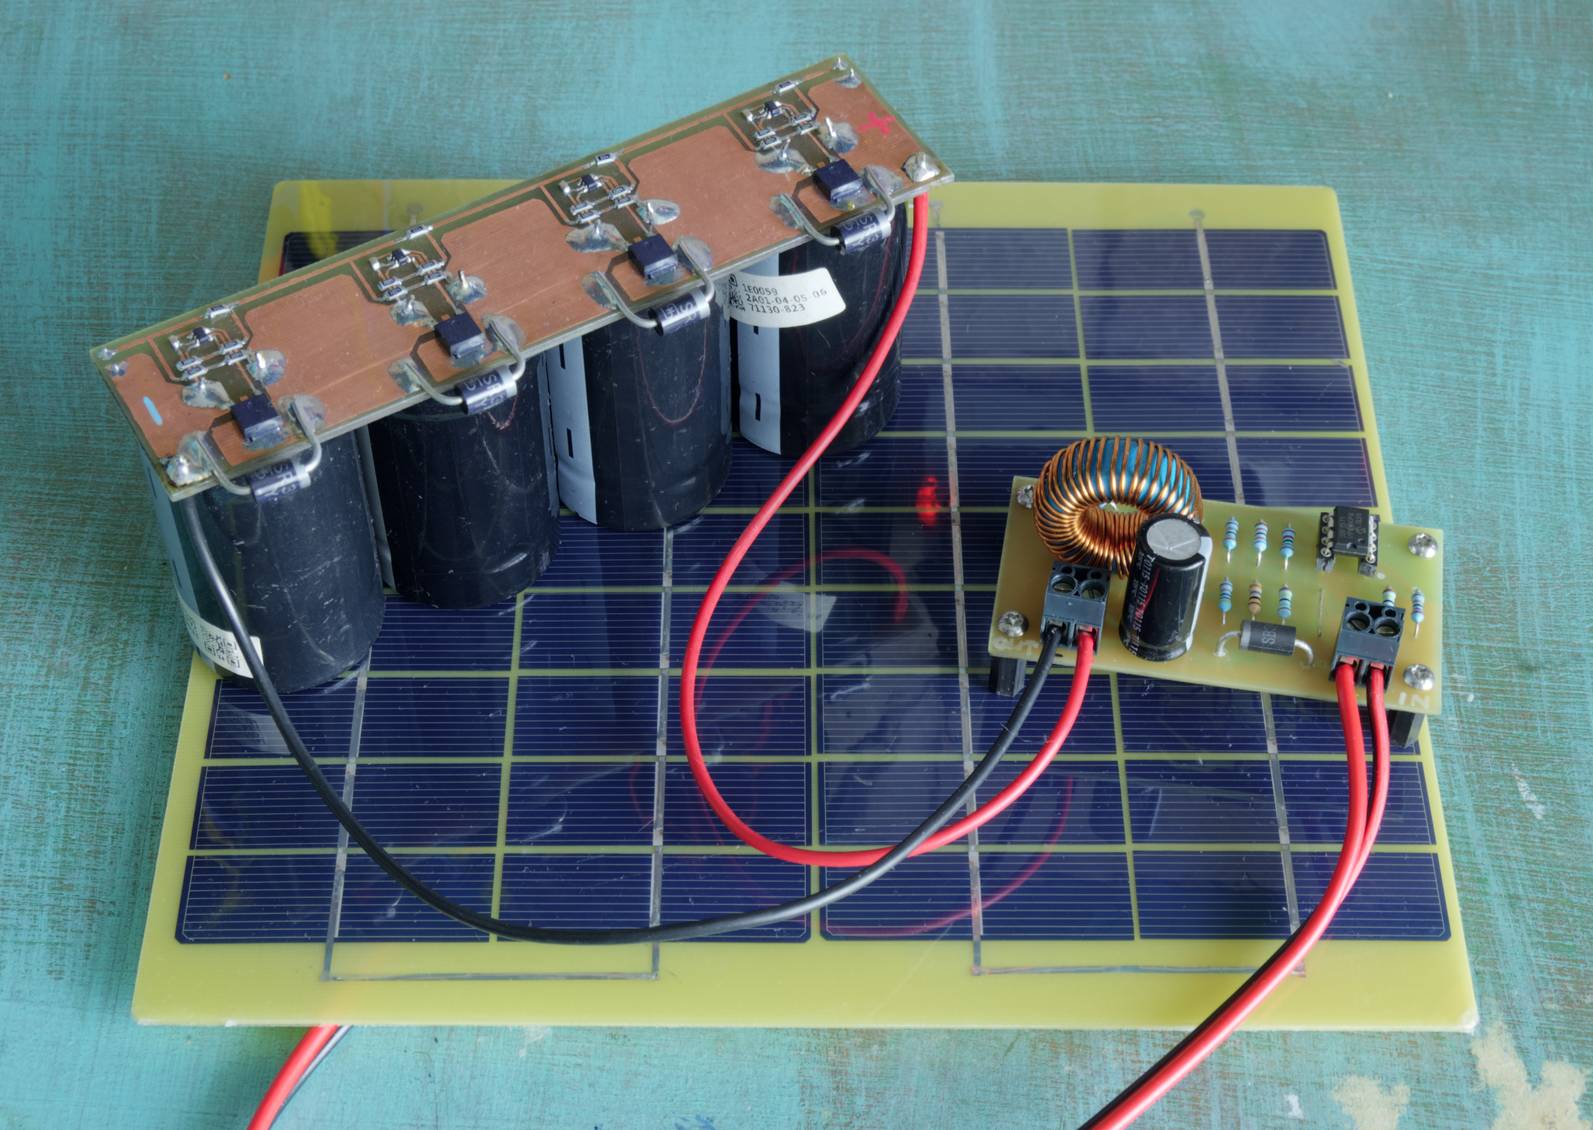 Photo of the PCB connected to the solar panel and supercapacitor bank.